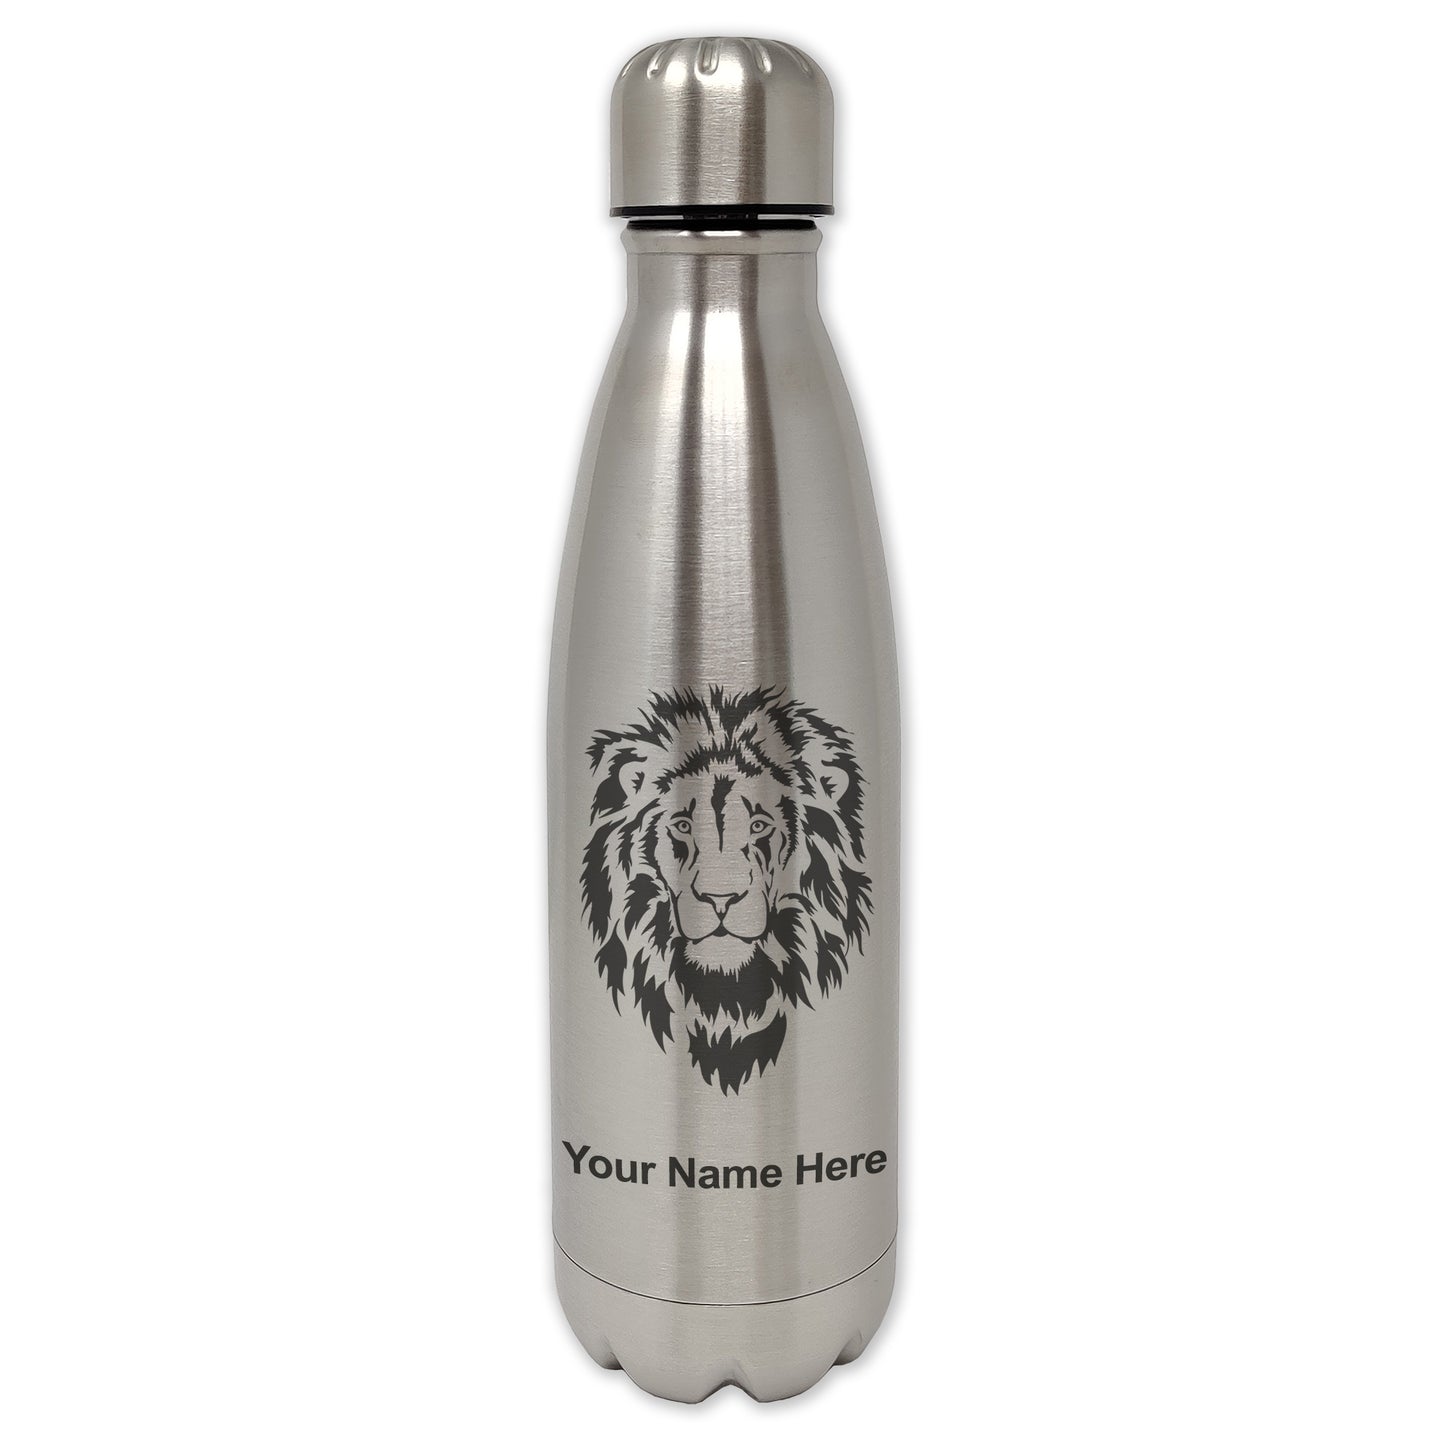 LaserGram Double Wall Water Bottle, Lion Head, Personalized Engraving Included